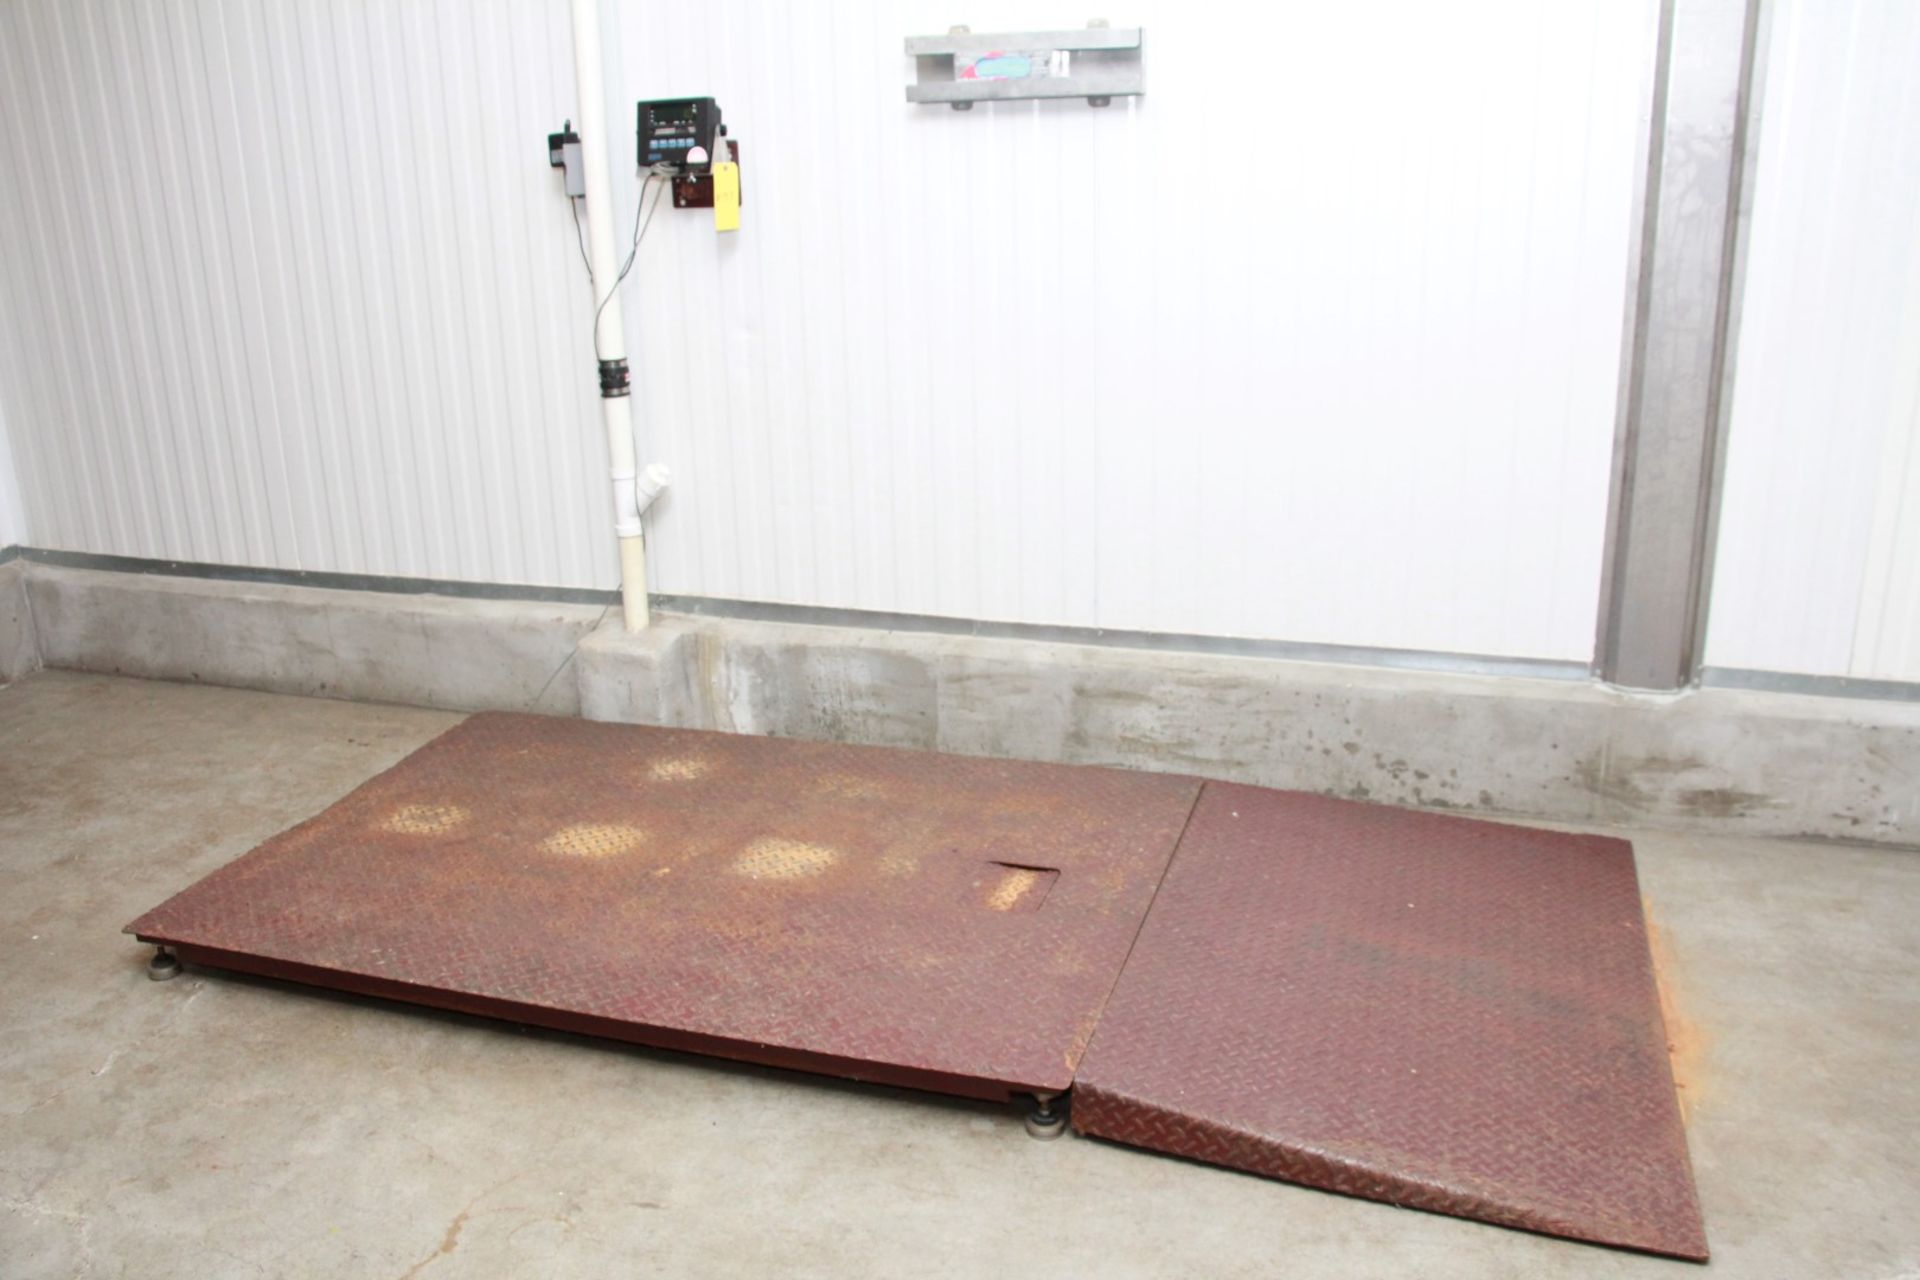 GSE 350 FLOOR SCALE. SN: 958831. - Image 2 of 3